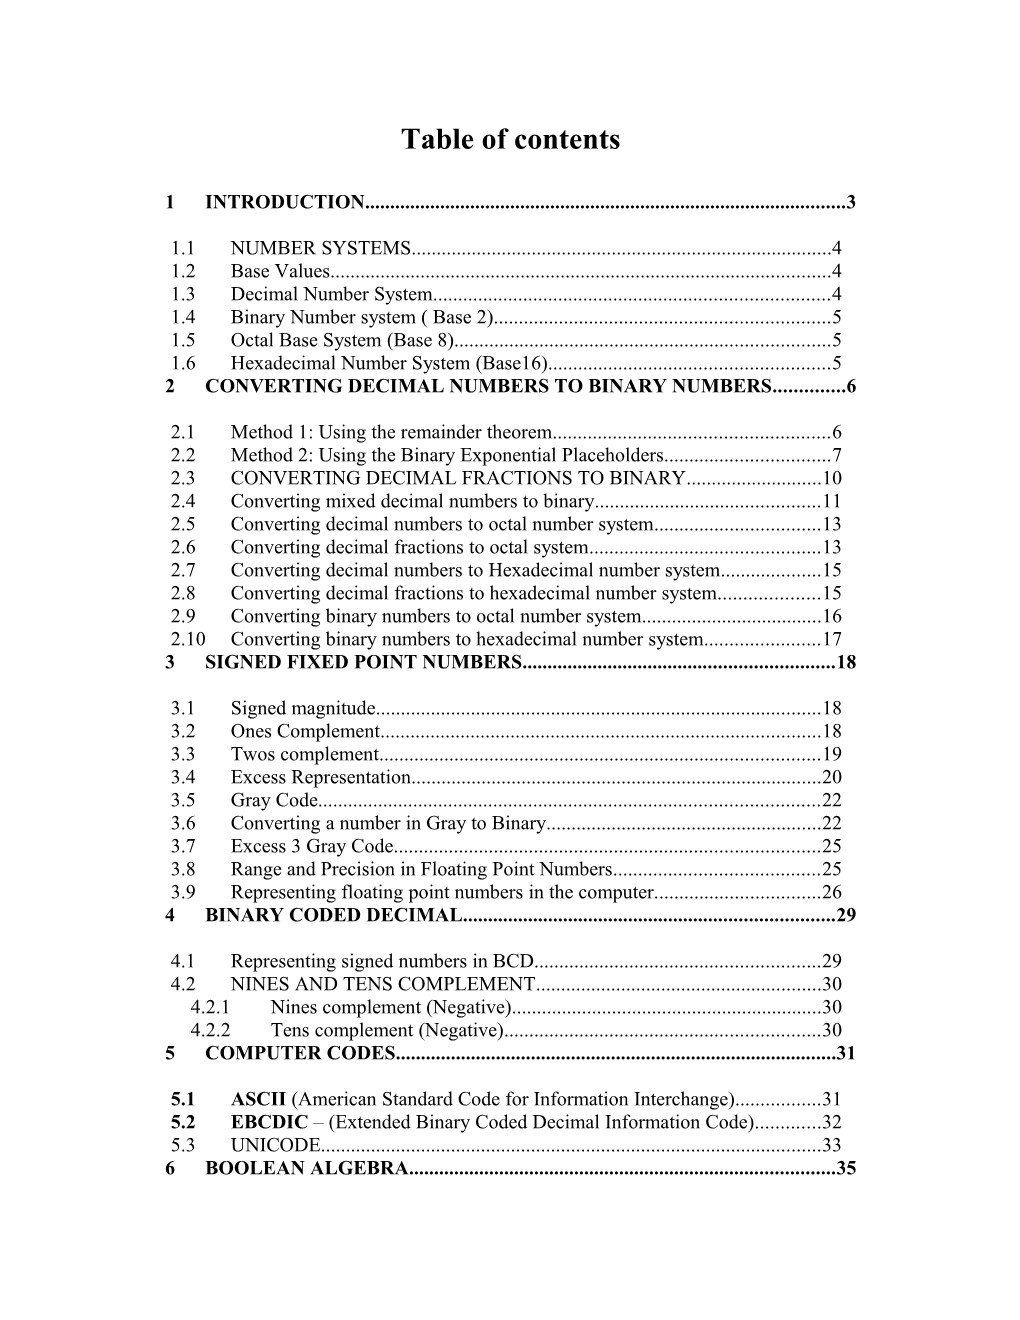 Table of Contents s461